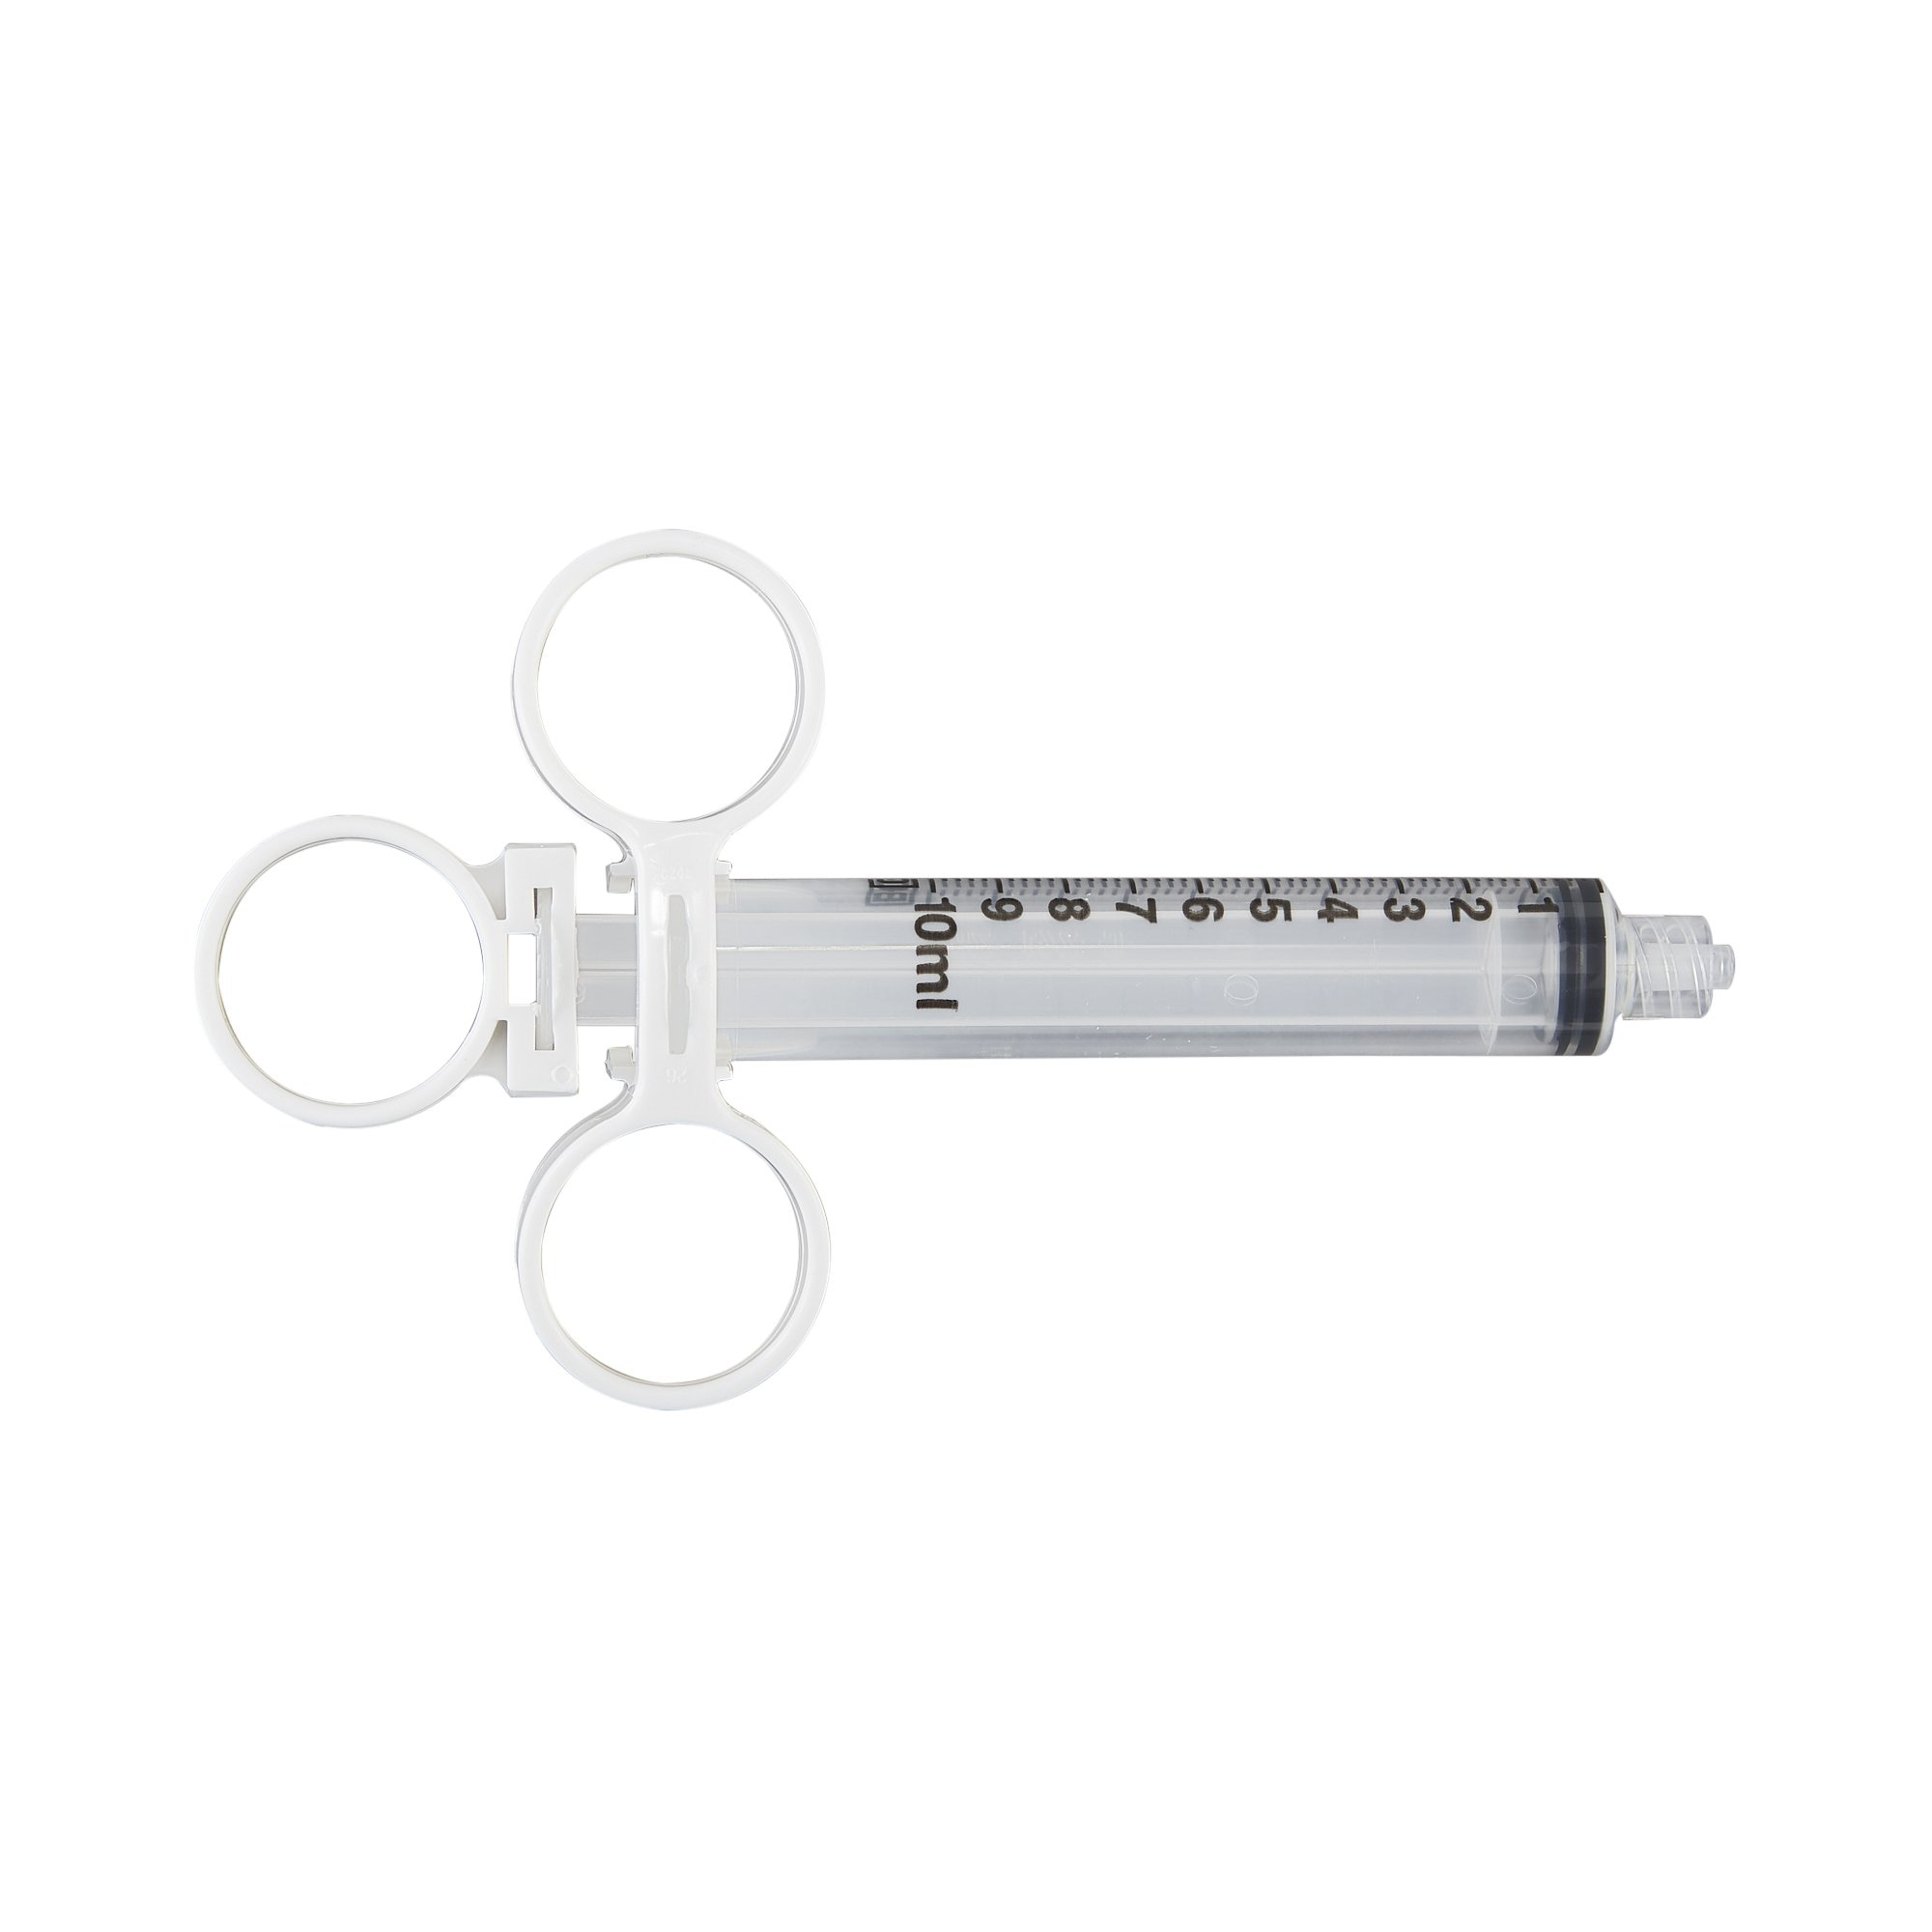 https://www.bd.com/content/dam/bd-assets/bd-com/all-sites-sku-images/medication-delivery-solutions/conventional-needles-and-syringes/309695.jpg